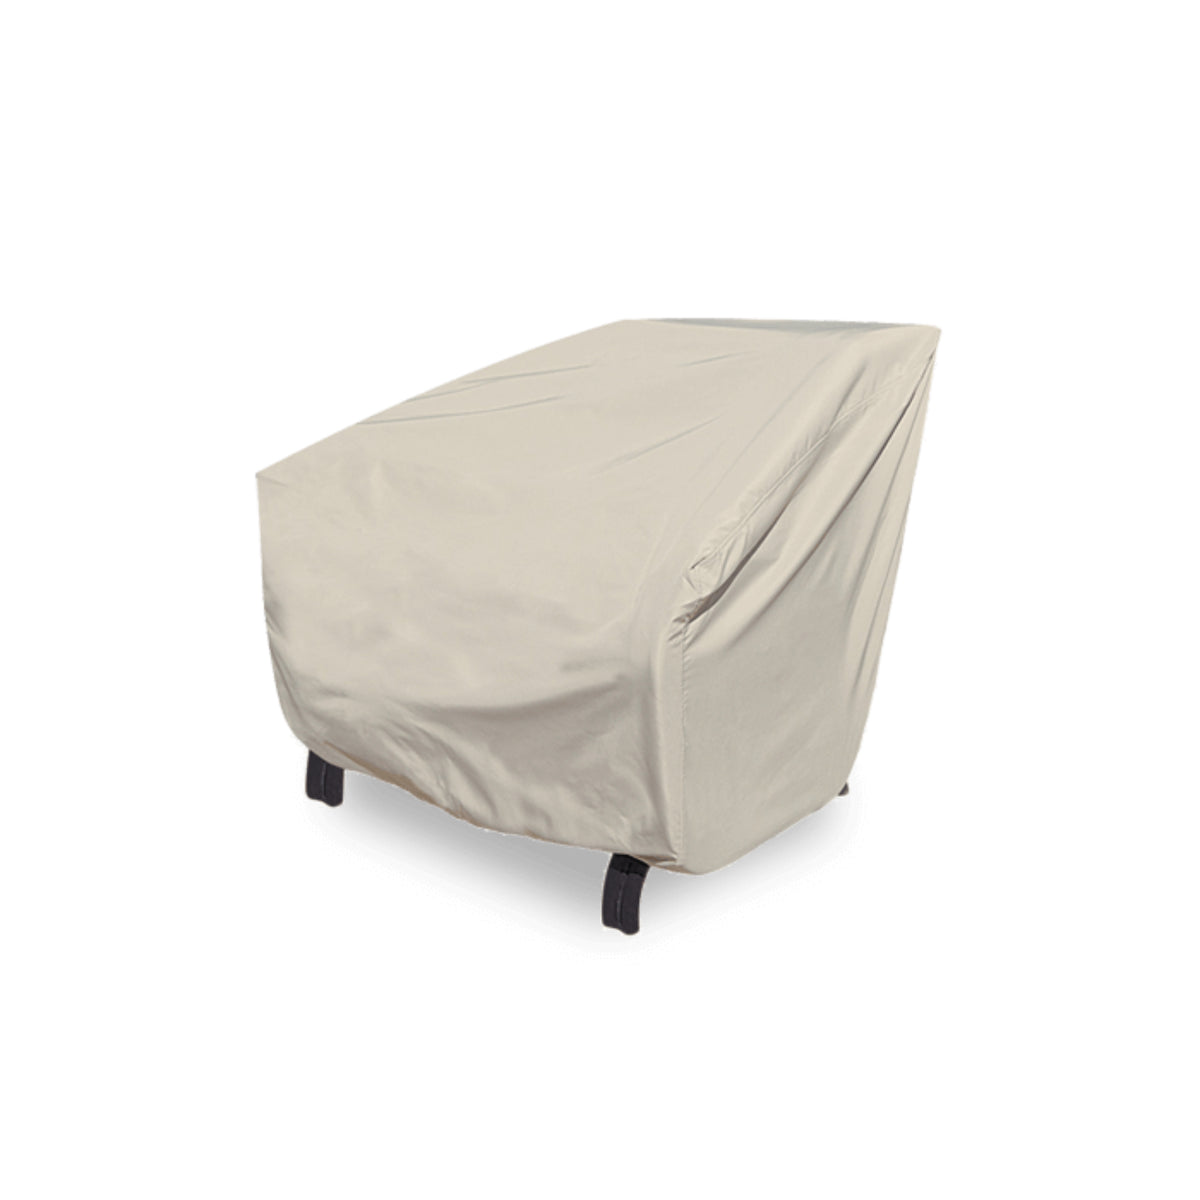 Extra Large Lounge Chair Cover